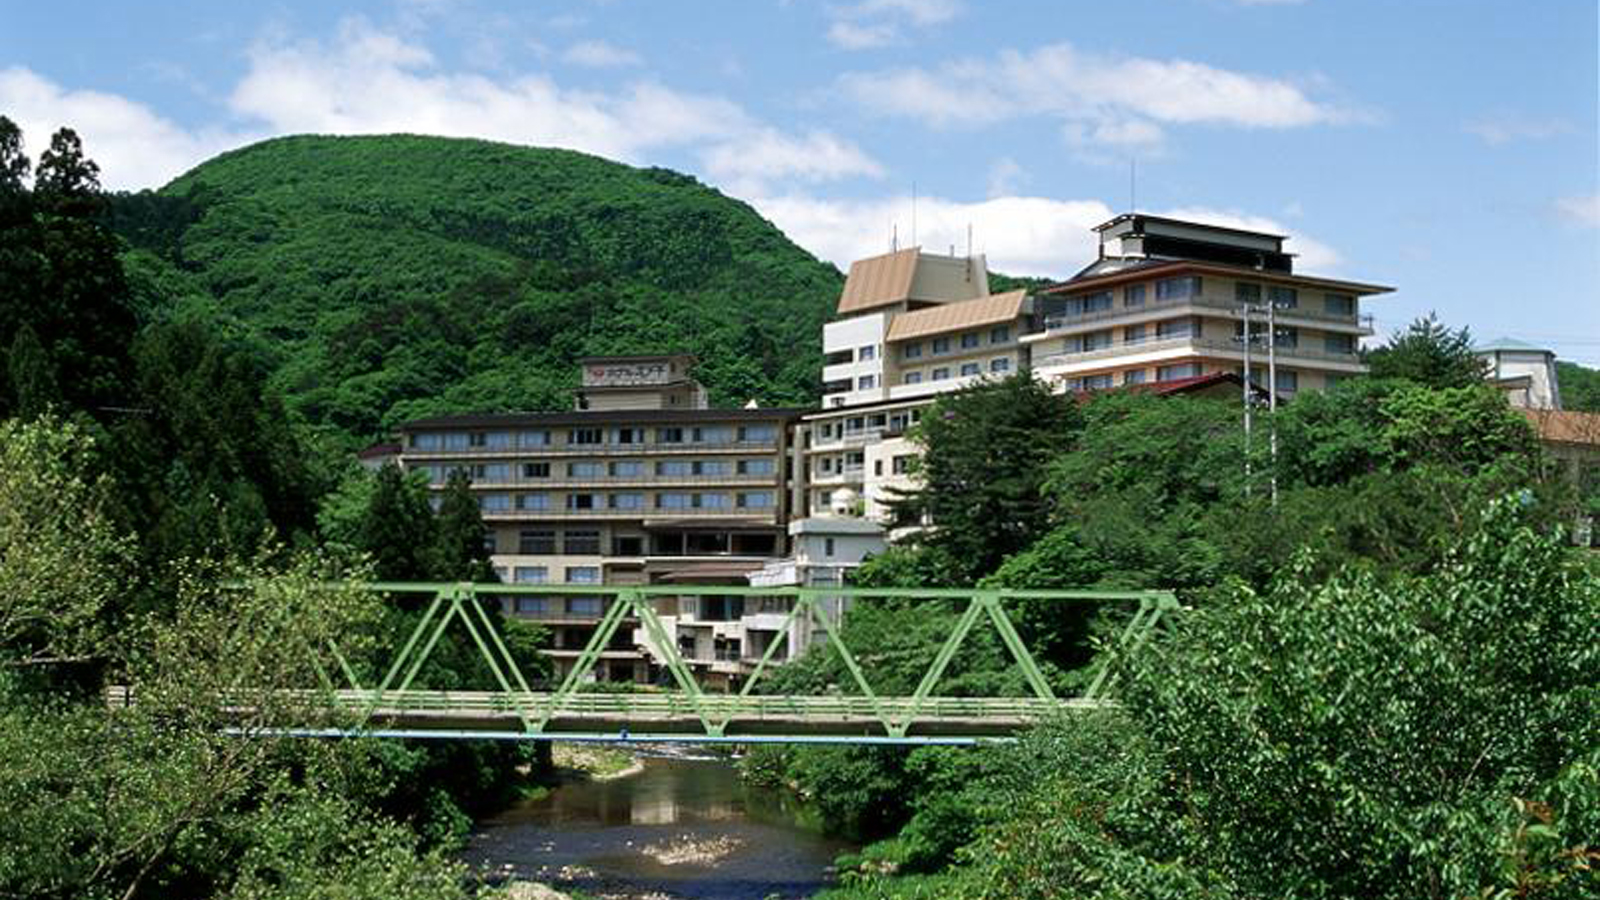 Shitohira Onsen Enjoy the Beautiful Valley Scenery in a Serene Atmosphere